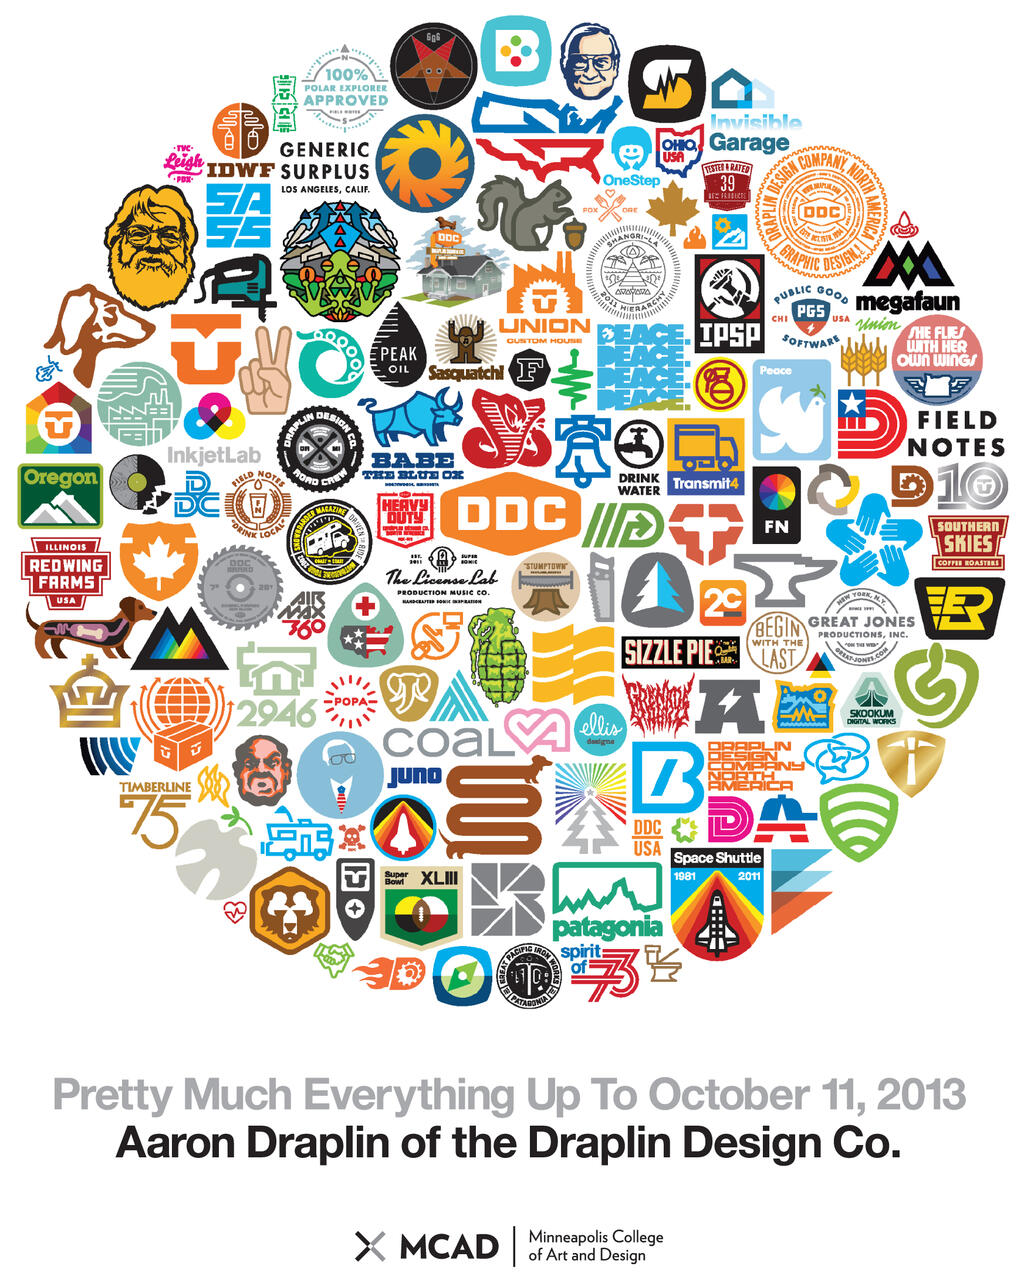 Pretty Much Everything Up To October 11, 2013 - Aaron Draplin of the Draplin Design Co